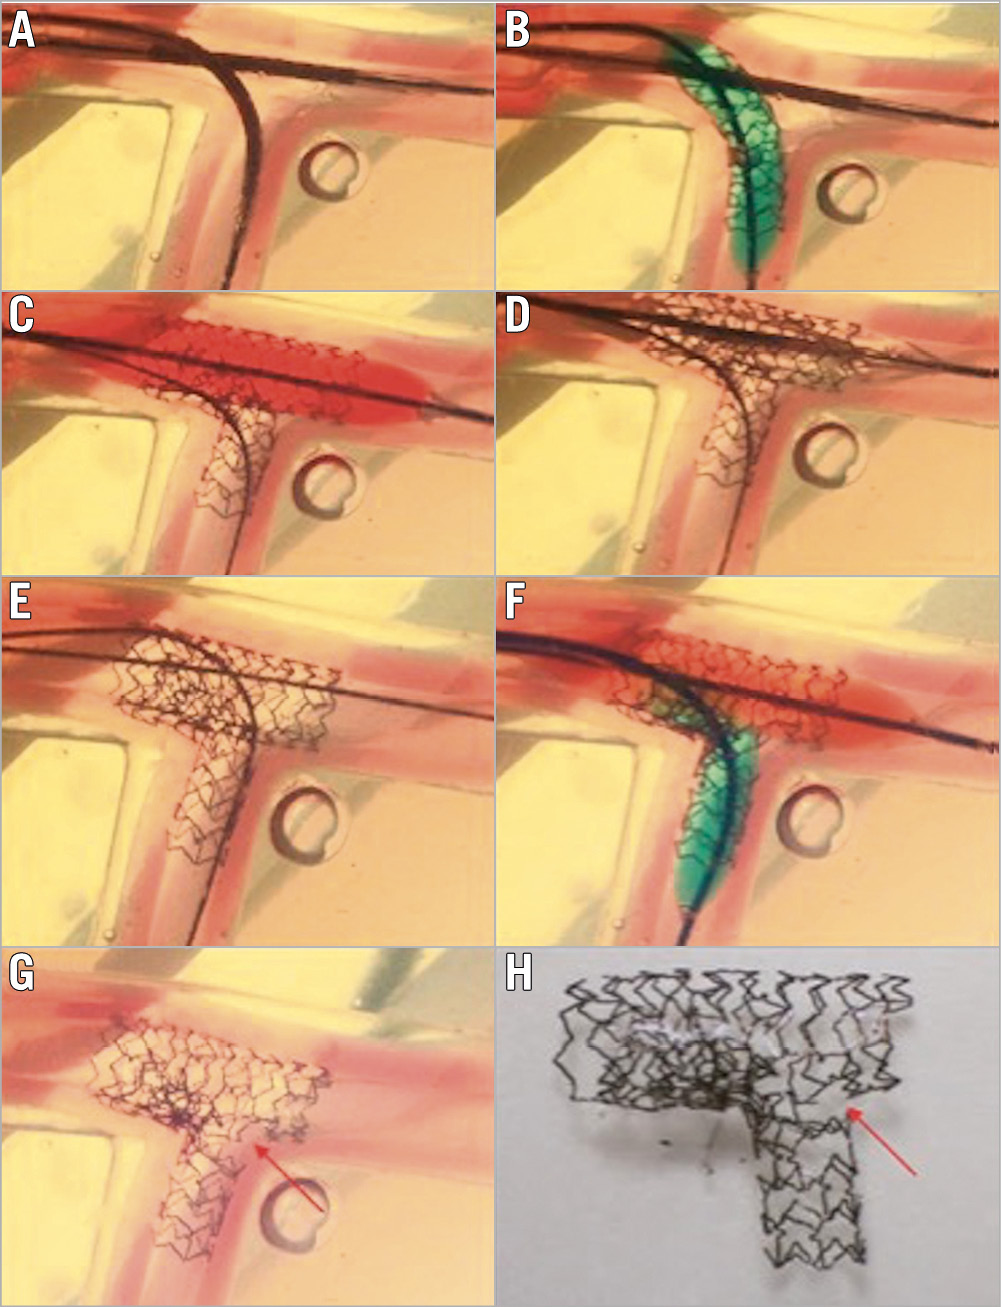 Figure 10. Drawback of too distal SB re-crossing in the classic crush technique. A) Position of MV and SB stents. B) SB stent deployment. C) MV stent deployment to crush the SB stent. D) Gap formation near the carina. E) Distal SB re-crossing, wire going between the SB stent and vessel wall. F) Final kissing balloon inflation. G) & H) Leaving a significant gap near the carina. MV: main vessel; SB: side branch Reprinted from Zhang JJ and Chen SL. Classic crush and DK crush stenting techniques. EuroIntervention. 2015;11:V102-V105. With permission from Europa Digital & Publishing.